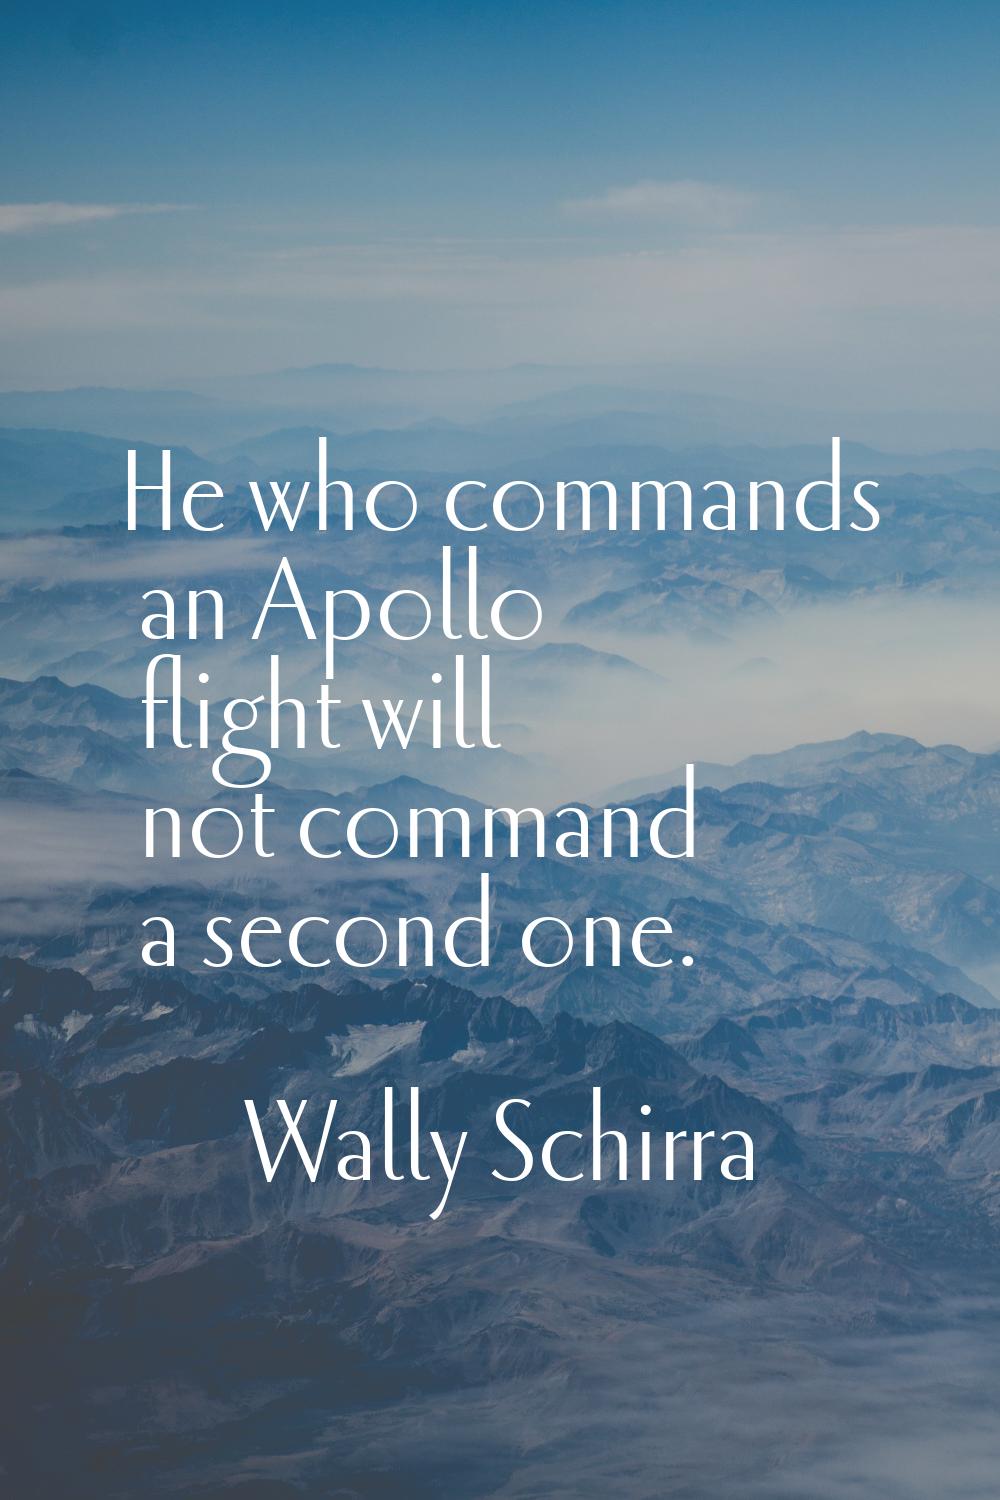 He who commands an Apollo flight will not command a second one.